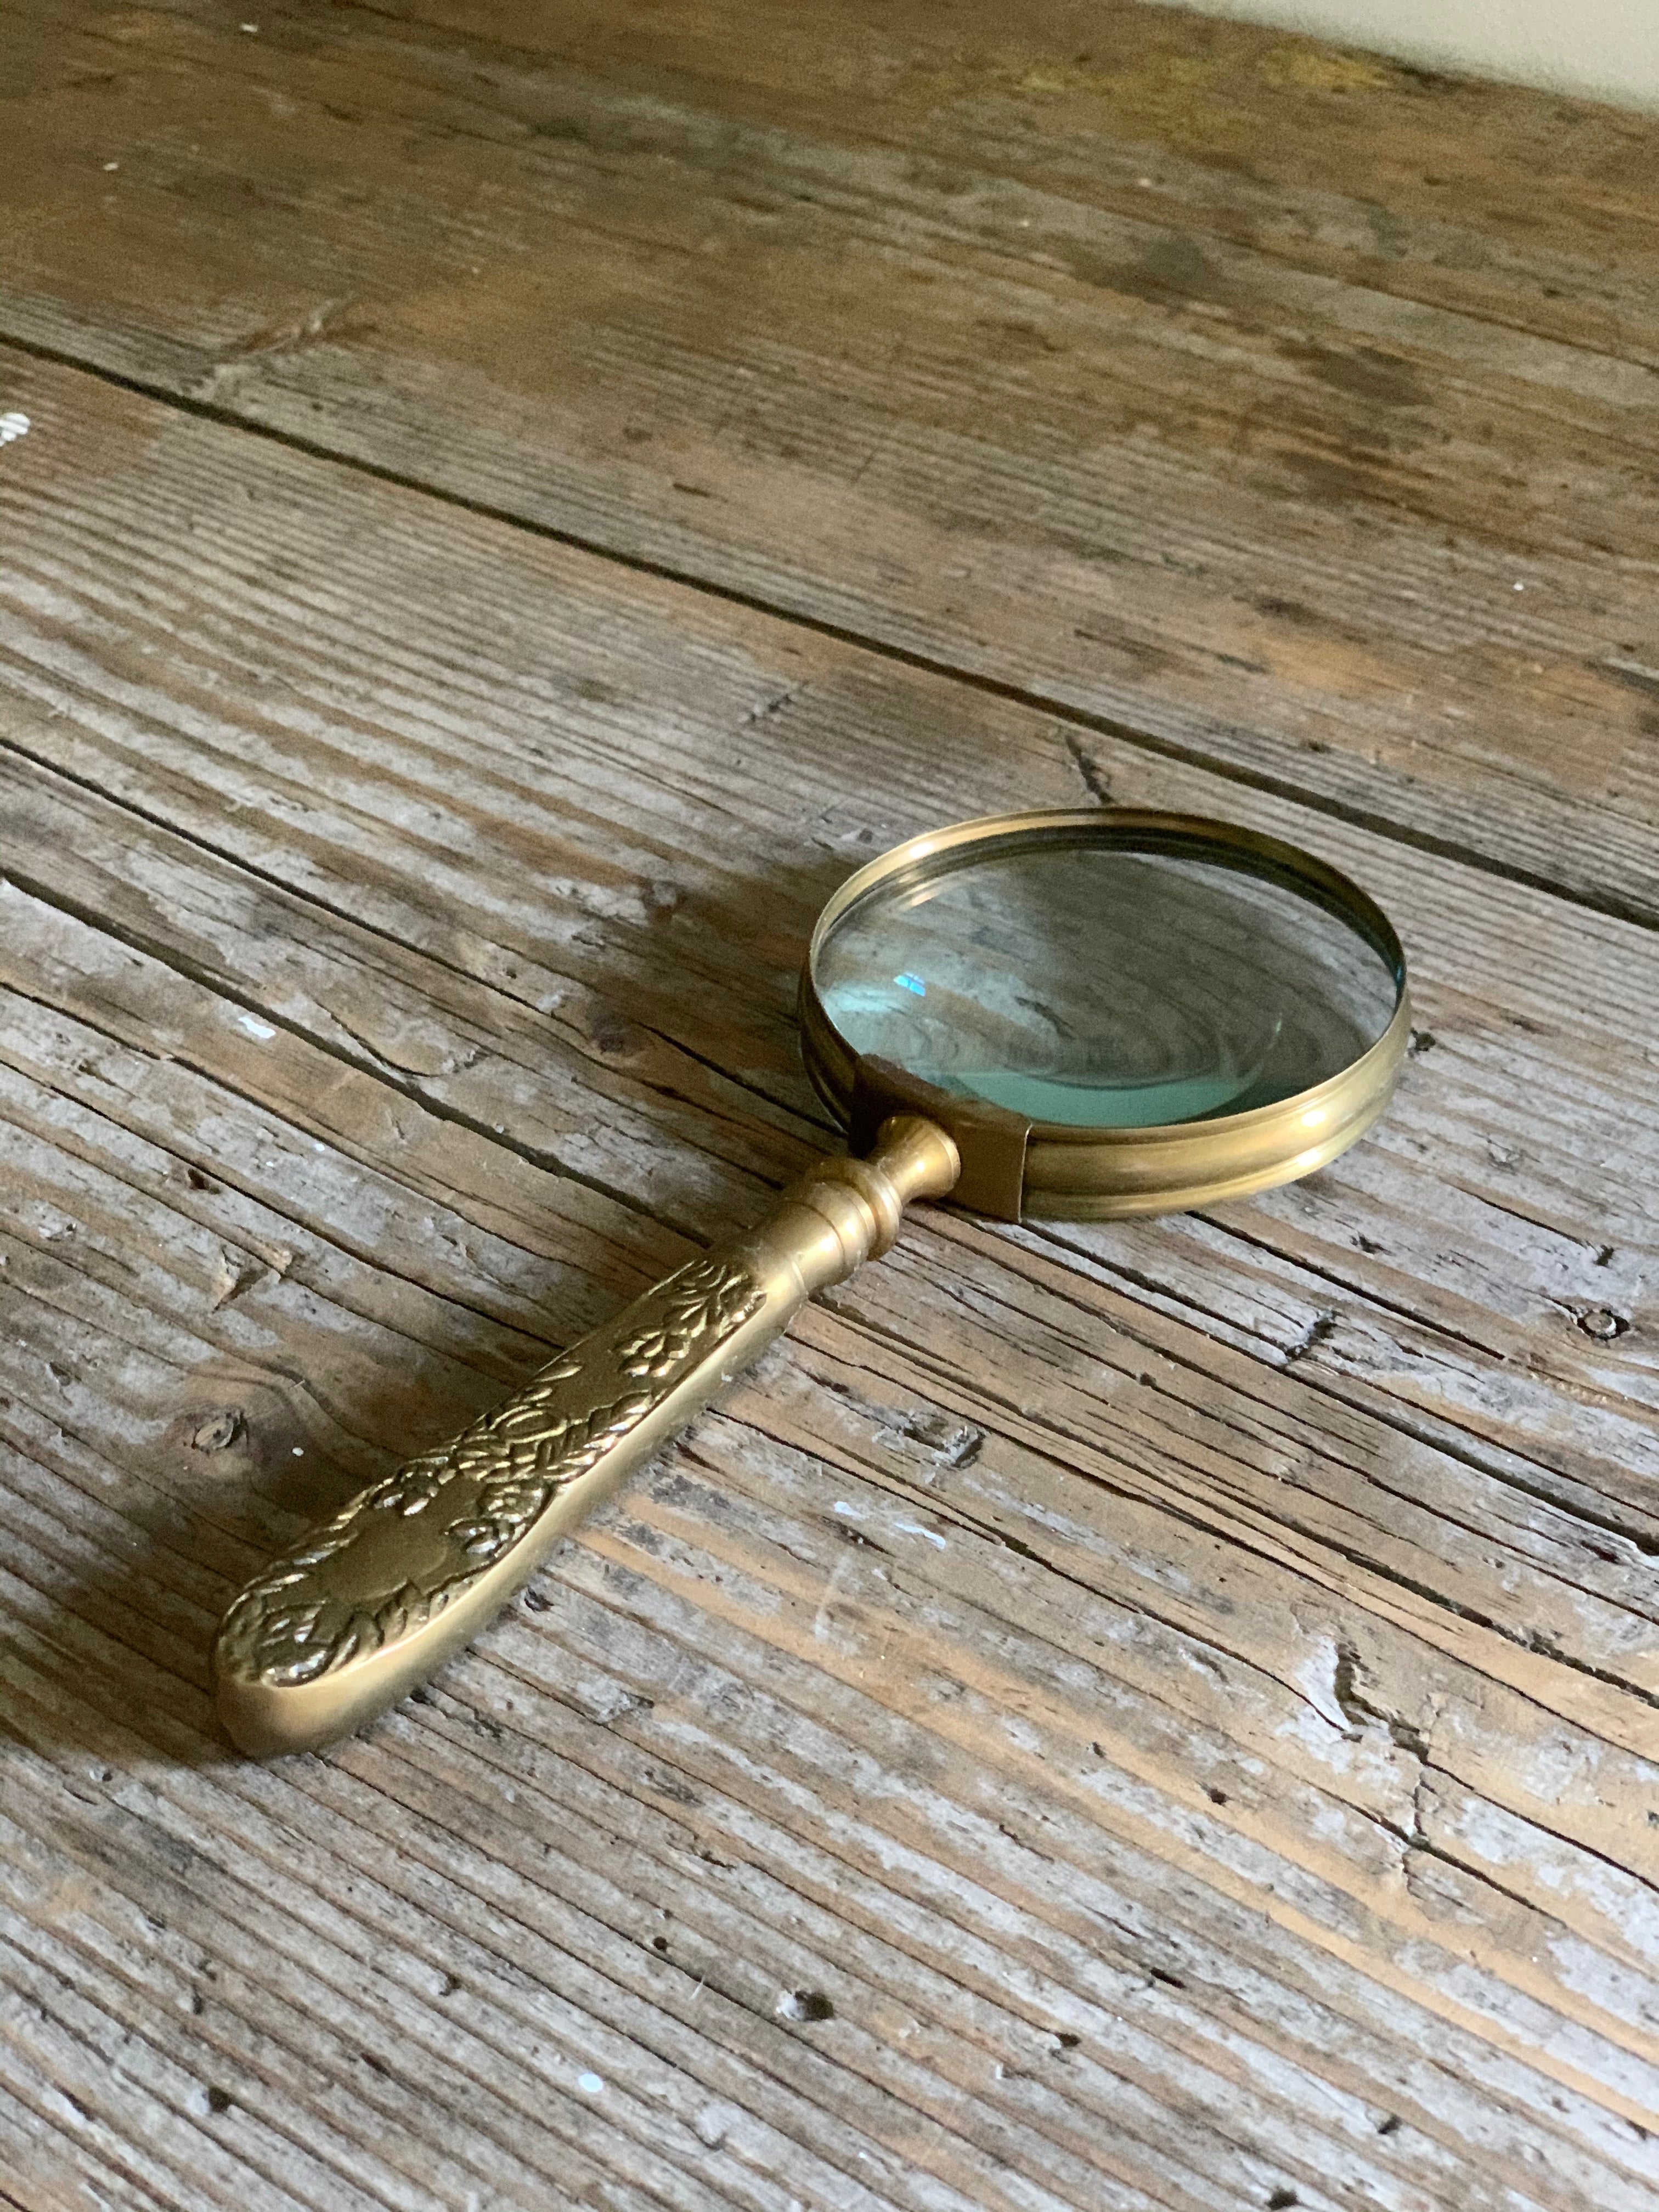 Small brass magnifying glass 4 inches by 1.25 inch. Vintage brass desi –  Vintage India Ca